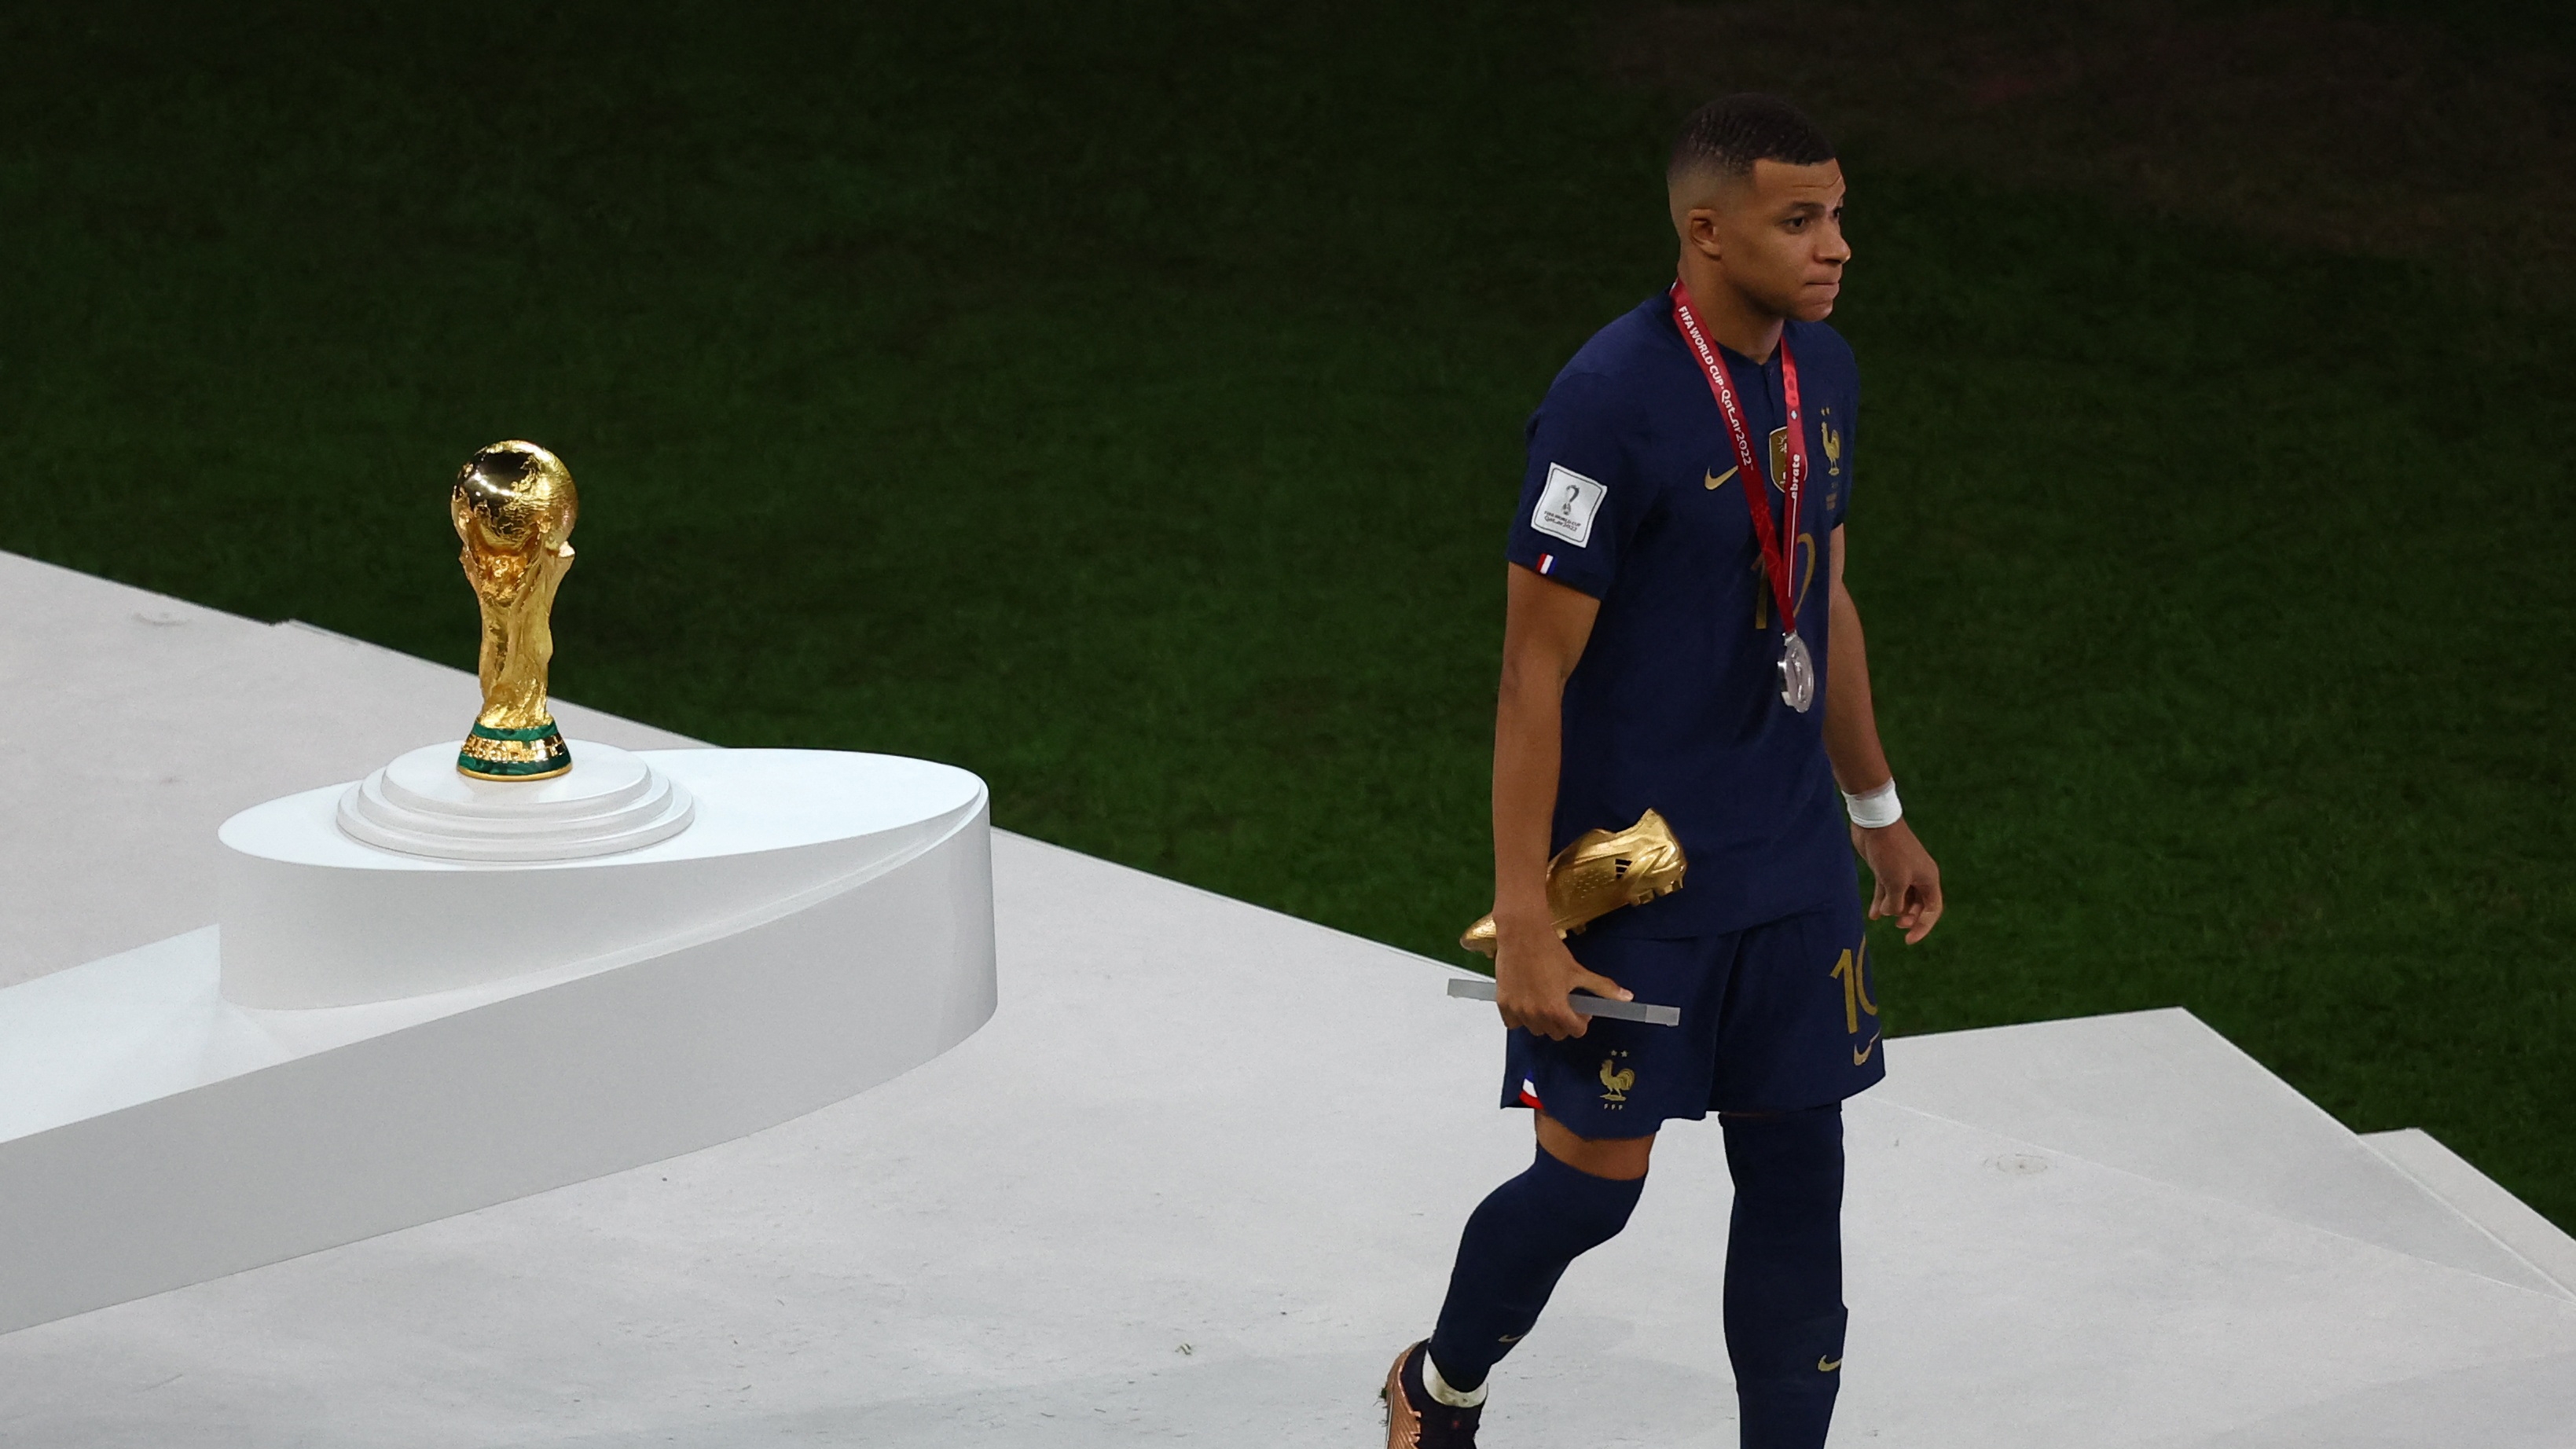 Soccer Football - FIFA World Cup Qatar 2022 - Final - Argentina v France - Lusail Stadium, Lusail, Qatar - December 18, 2022 France's Kylian Mbappe  holds the Golden Boot award as he walks after receiving the silver medal REUTERS/Paul Childs